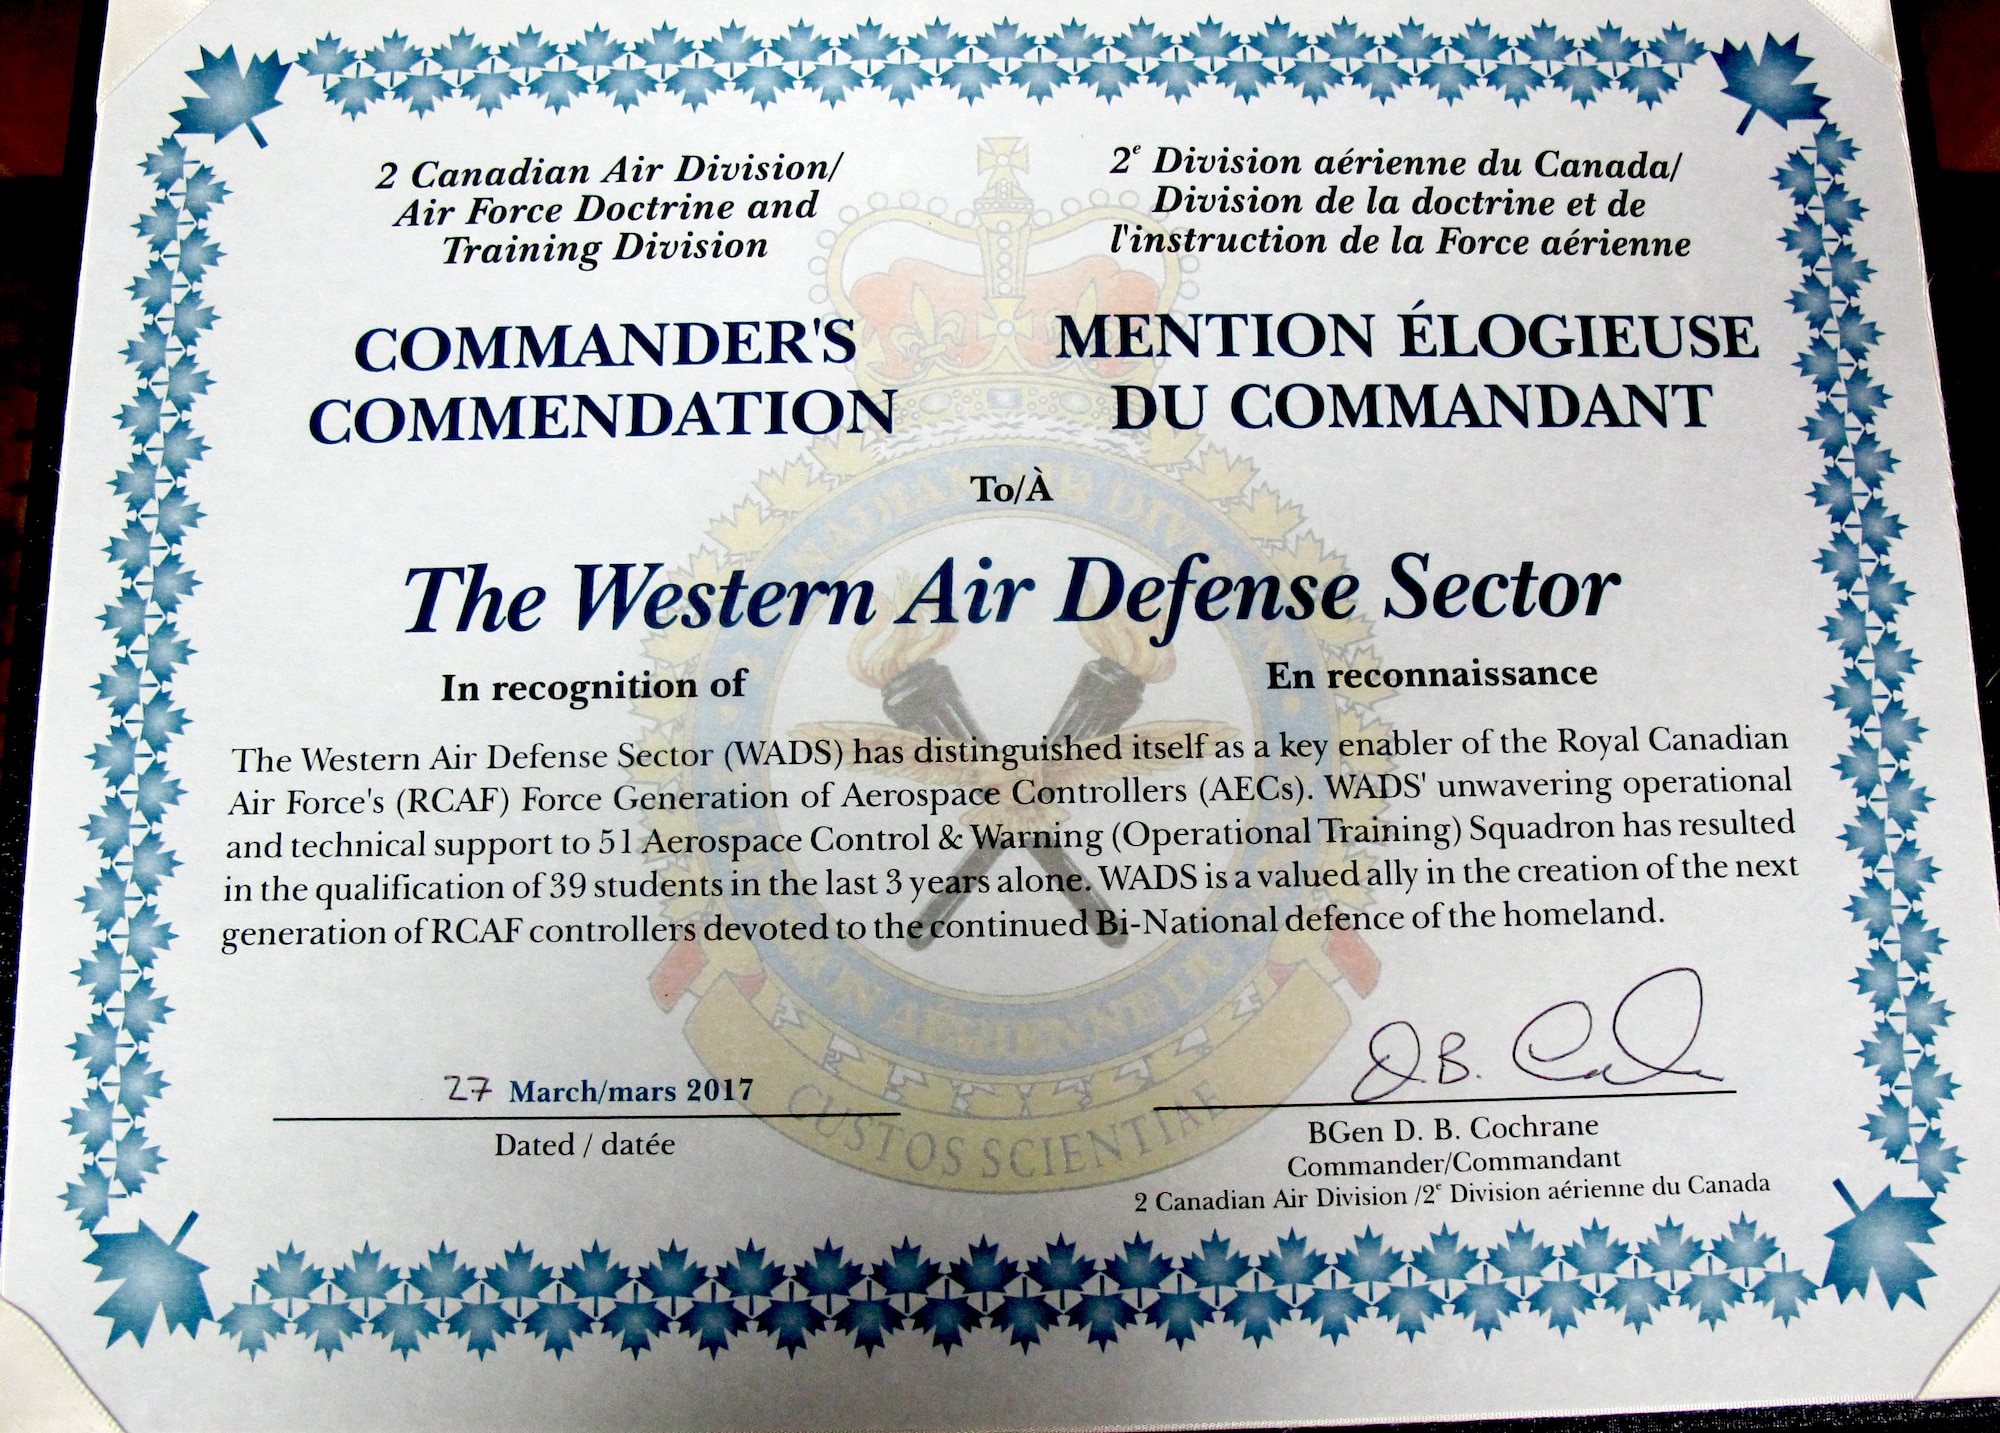 The 2nd Canadian Air Division Commander’s Unit Commendation citiation is presented to the Western Air Defense Sector during the Canadian Mess Dinner April 7 for providing critical live and virtual training to Canadian aerospace controllers from the 51 Aerospace Control and Warning (Operational Training) Squadron from North Bay, Ontario.